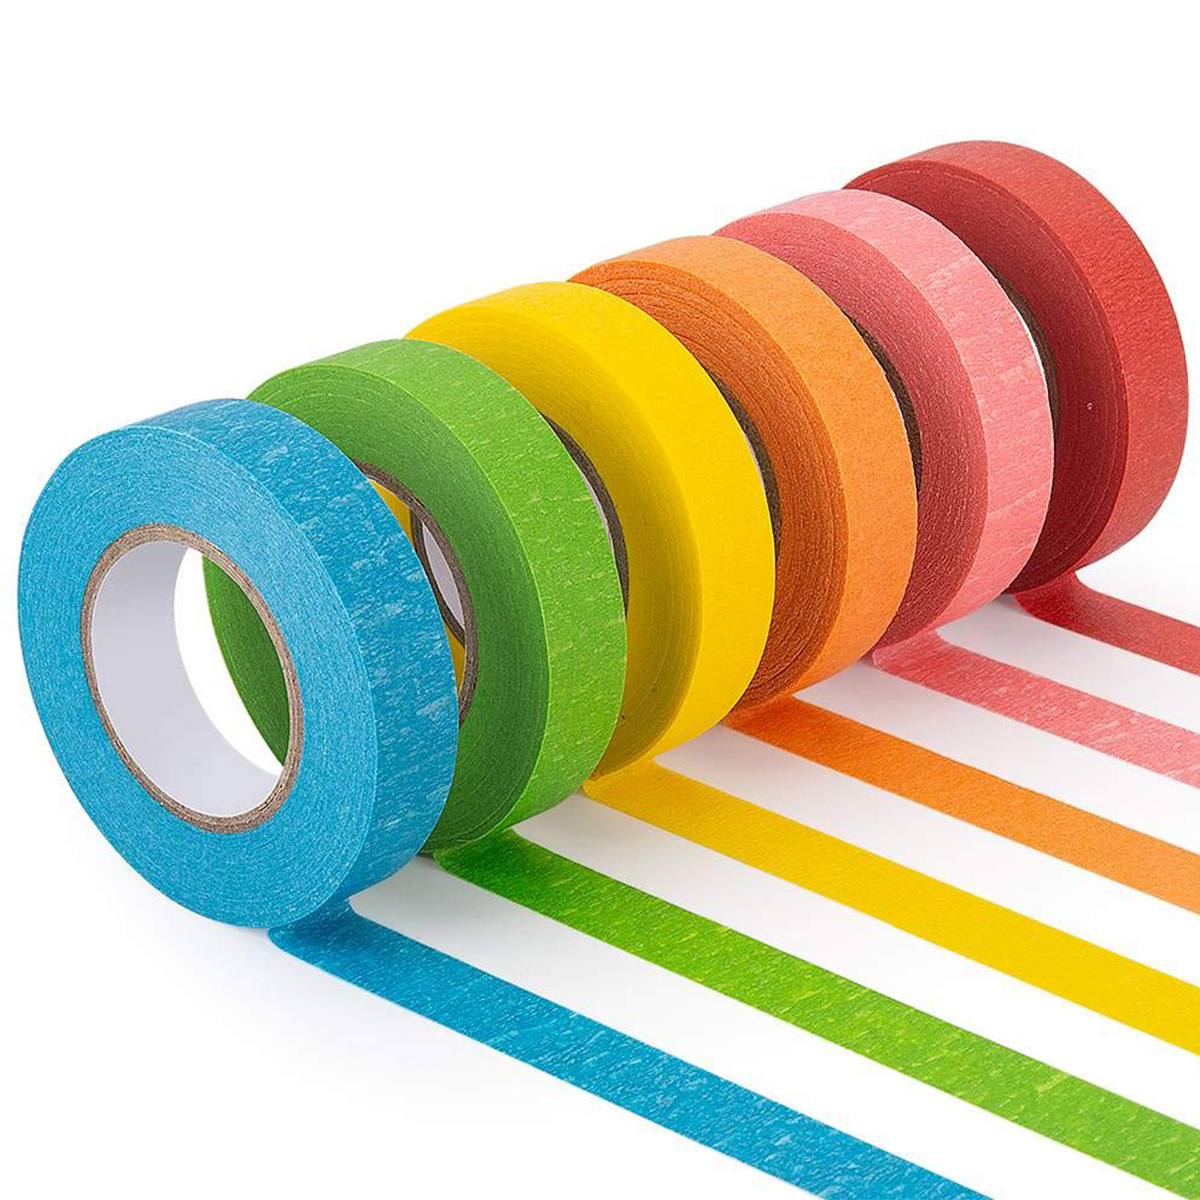 Craftzilla Colored Masking Tape 6 Roll Multi Pack 180 Feet x 1 Inch of  Colorful Craft Tape Vibrant Rainbow Colored Painters Tape Great for Arts &  Crafts Labeling and Color-Coding 10 Yards x 1 Inch